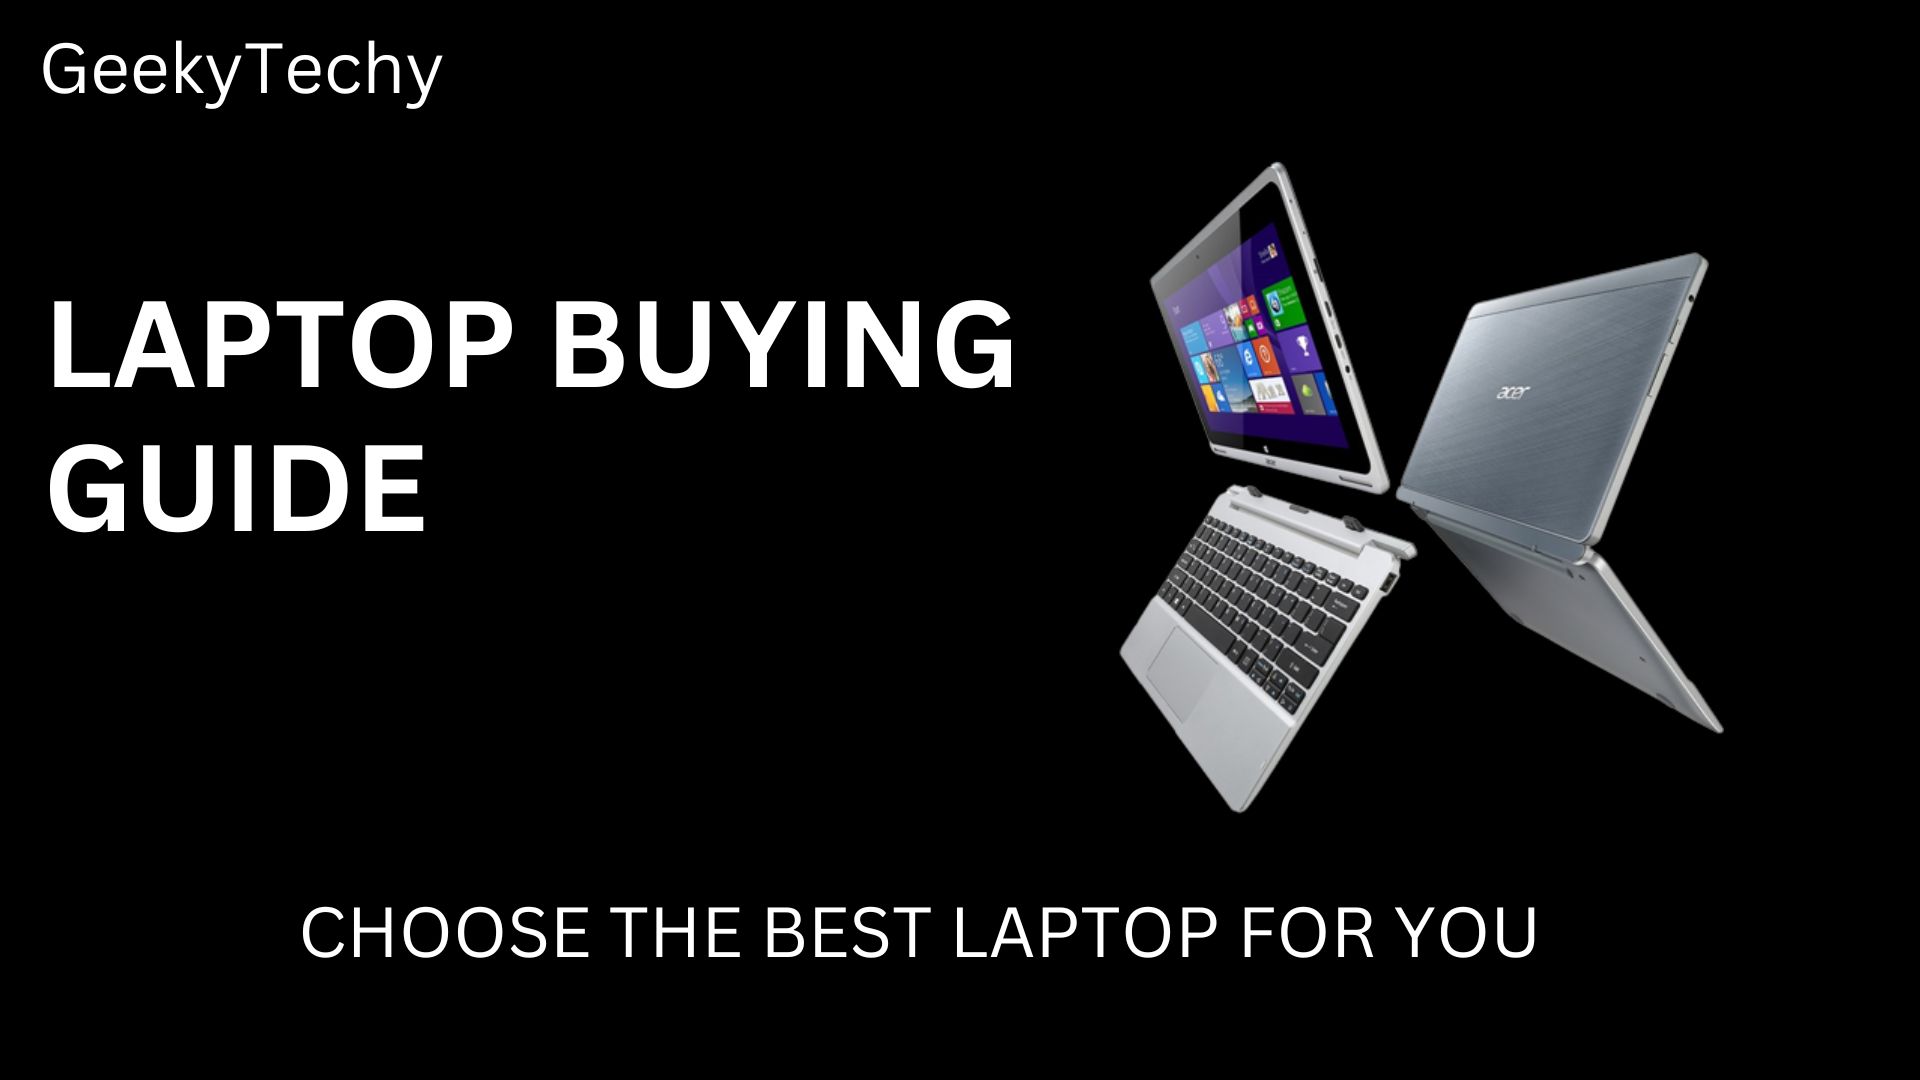 Do you know which laptop is best for you?